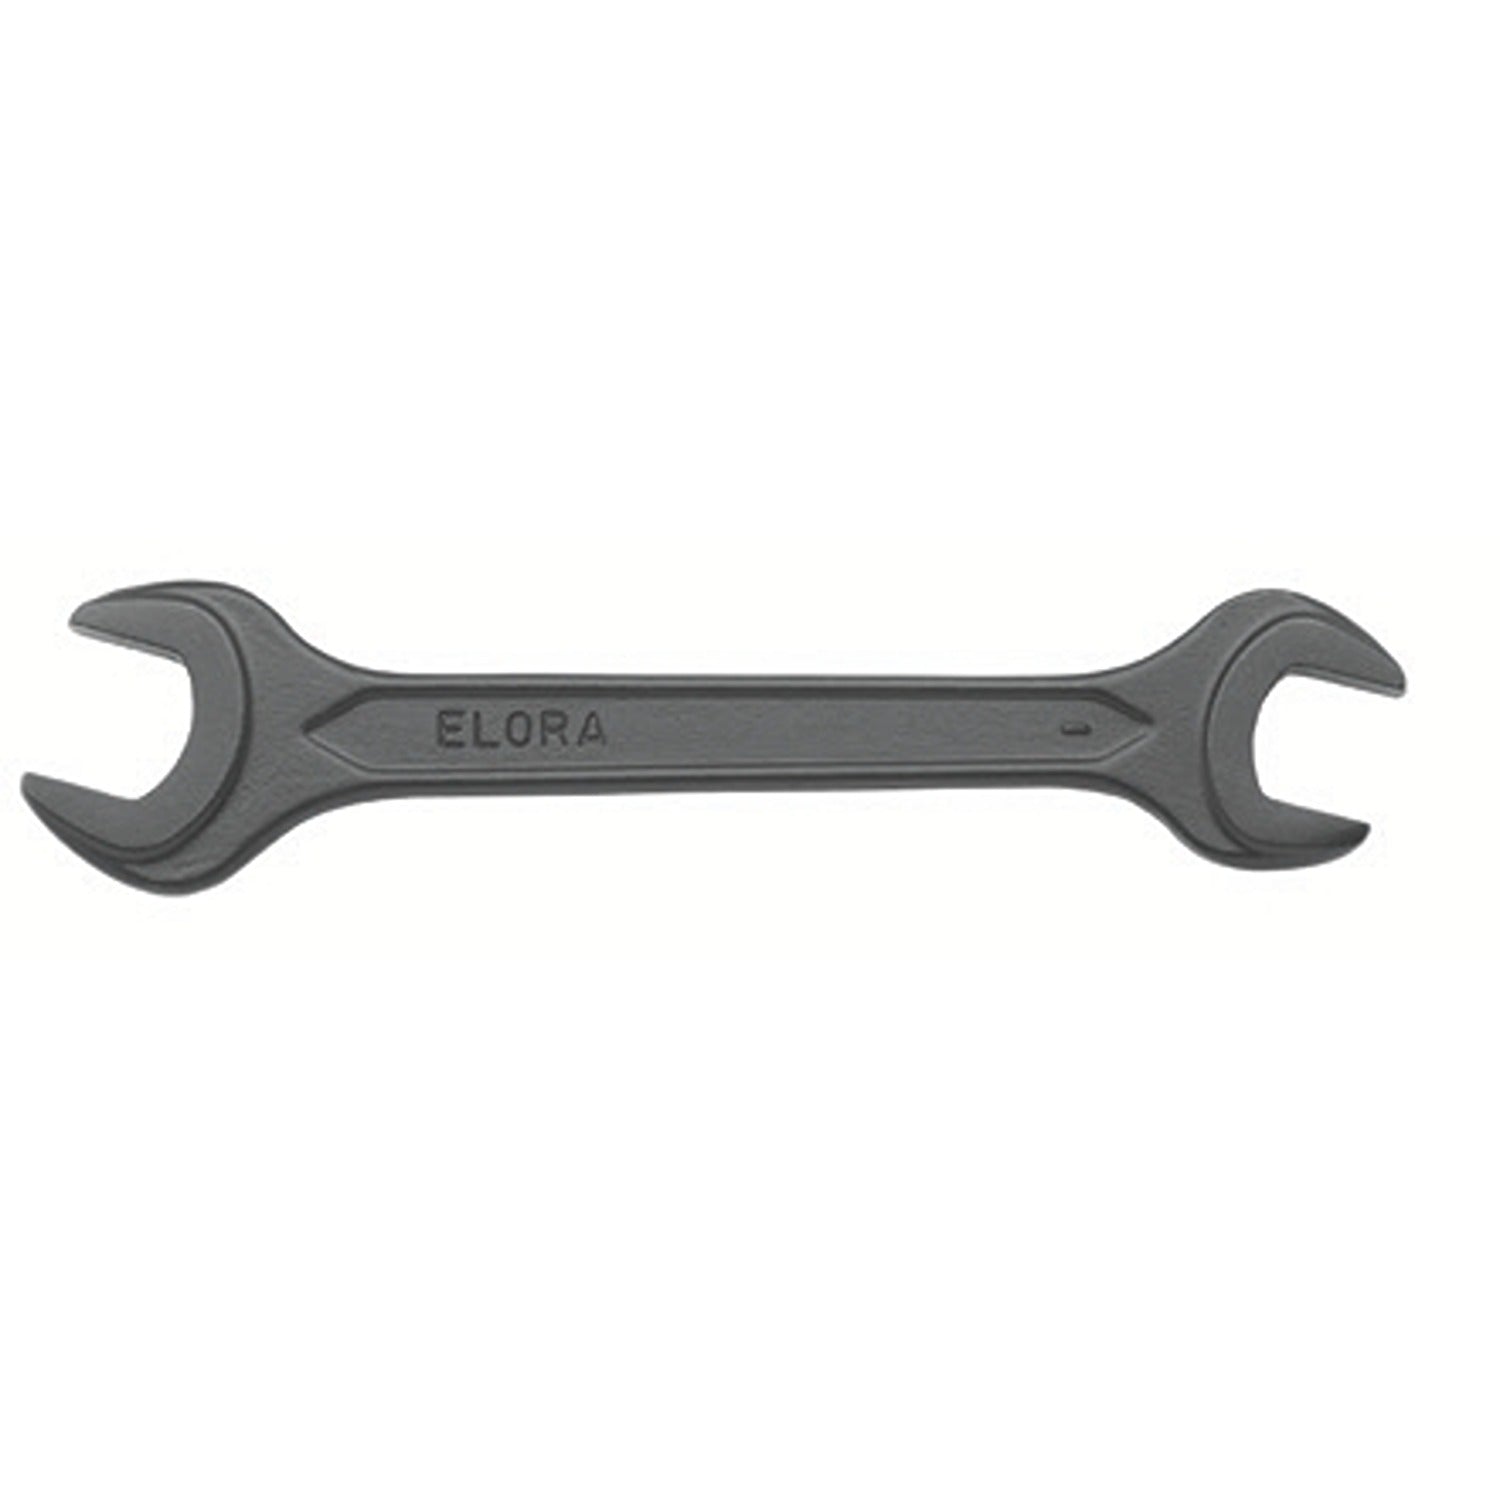 ELORA 895 Double Open Ended Spanner 265-480mm (ELORA Tools) - Premium Double Open Ended Spanner from ELORA - Shop now at Yew Aik.